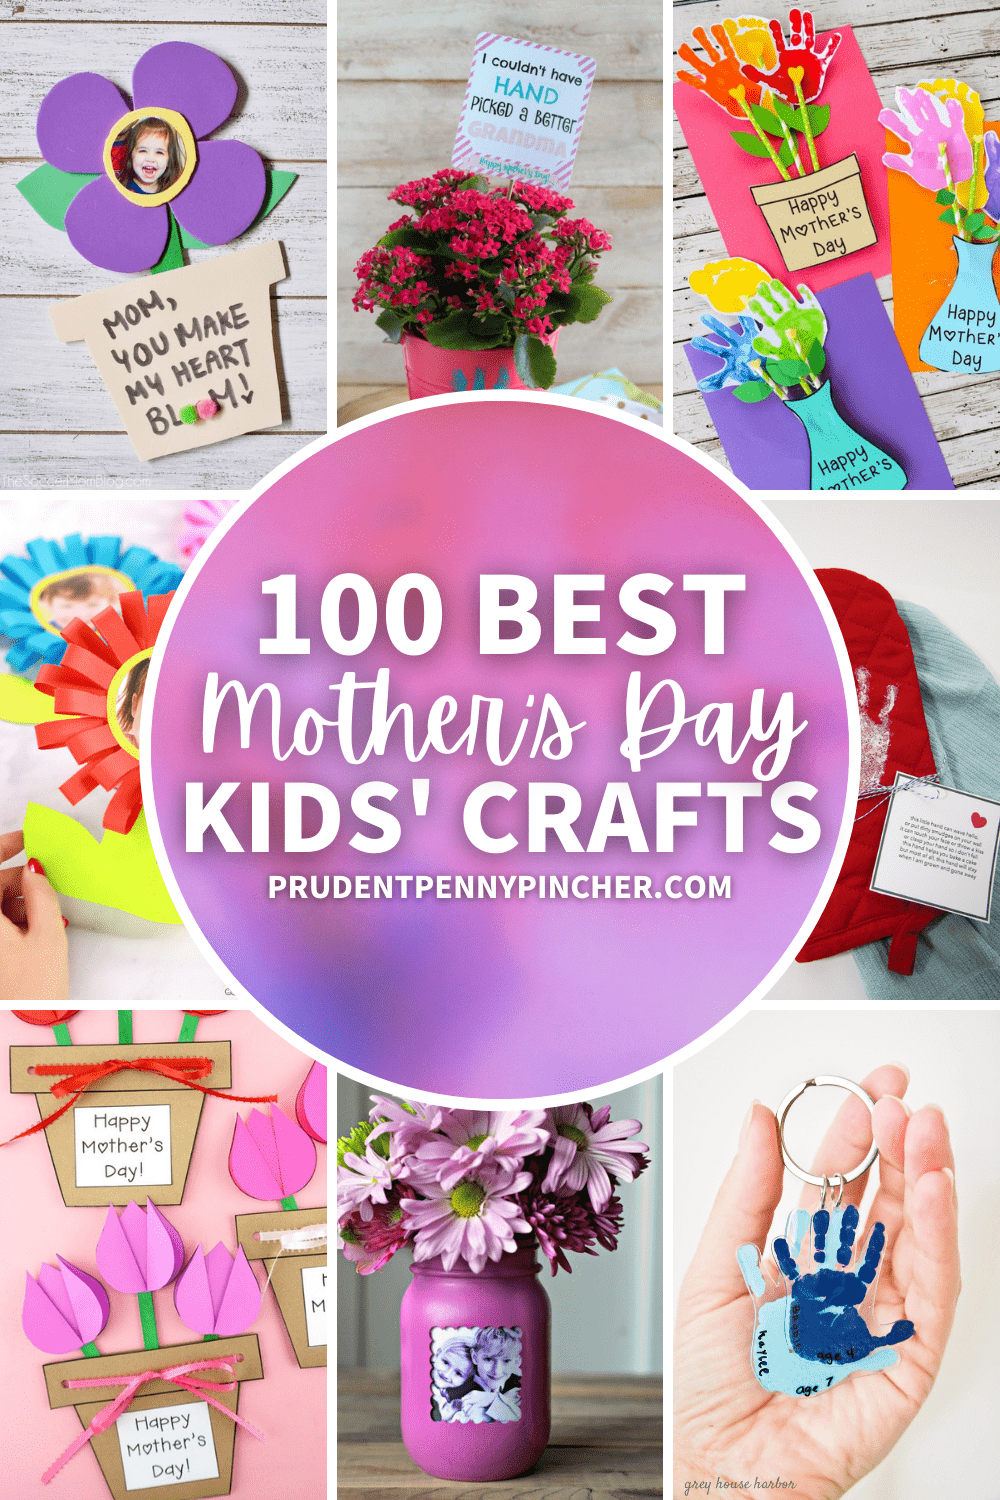 Mother's Day crafts for kids